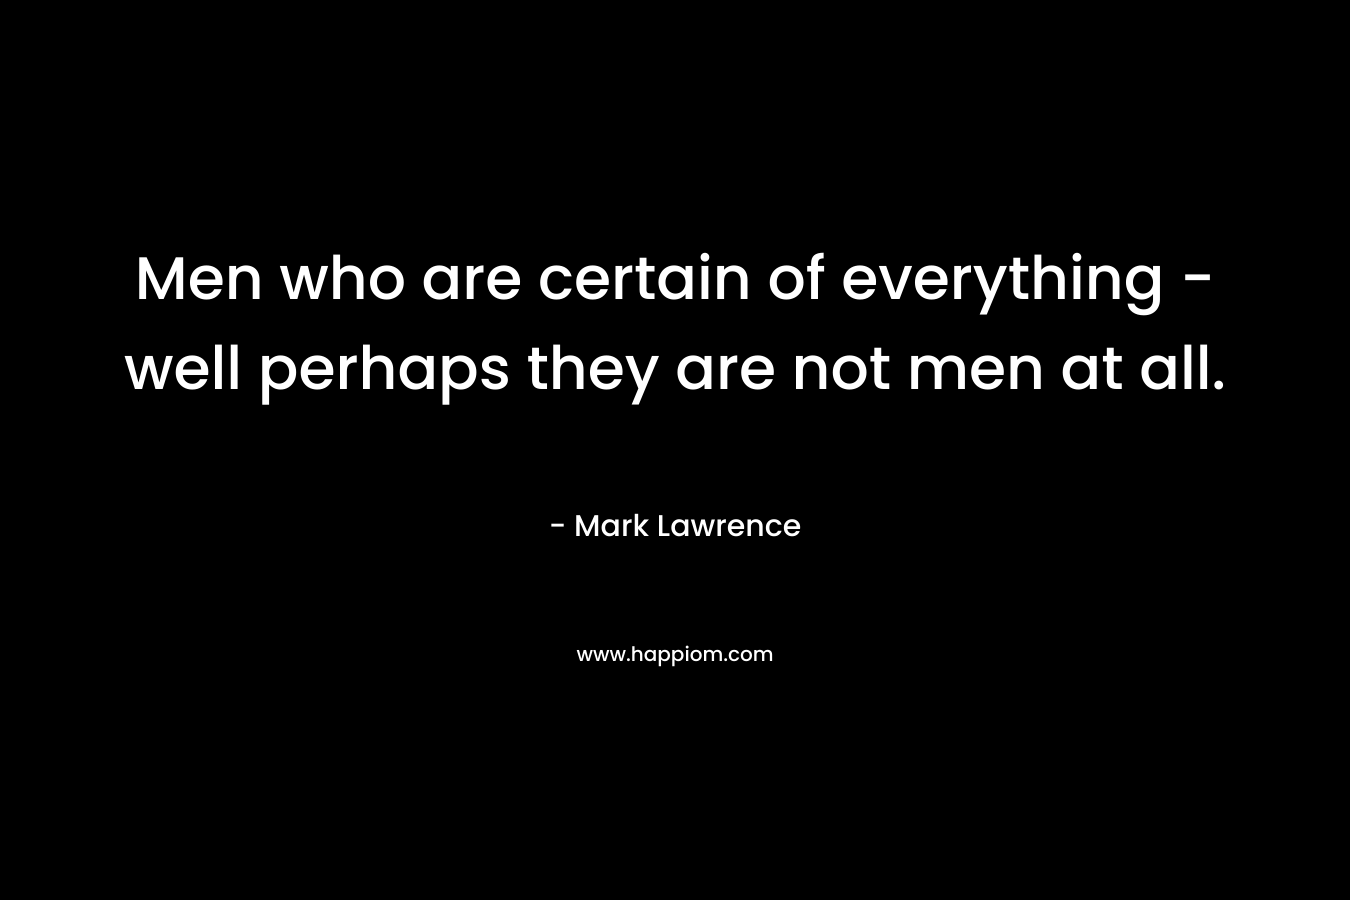 Men who are certain of everything - well perhaps they are not men at all.